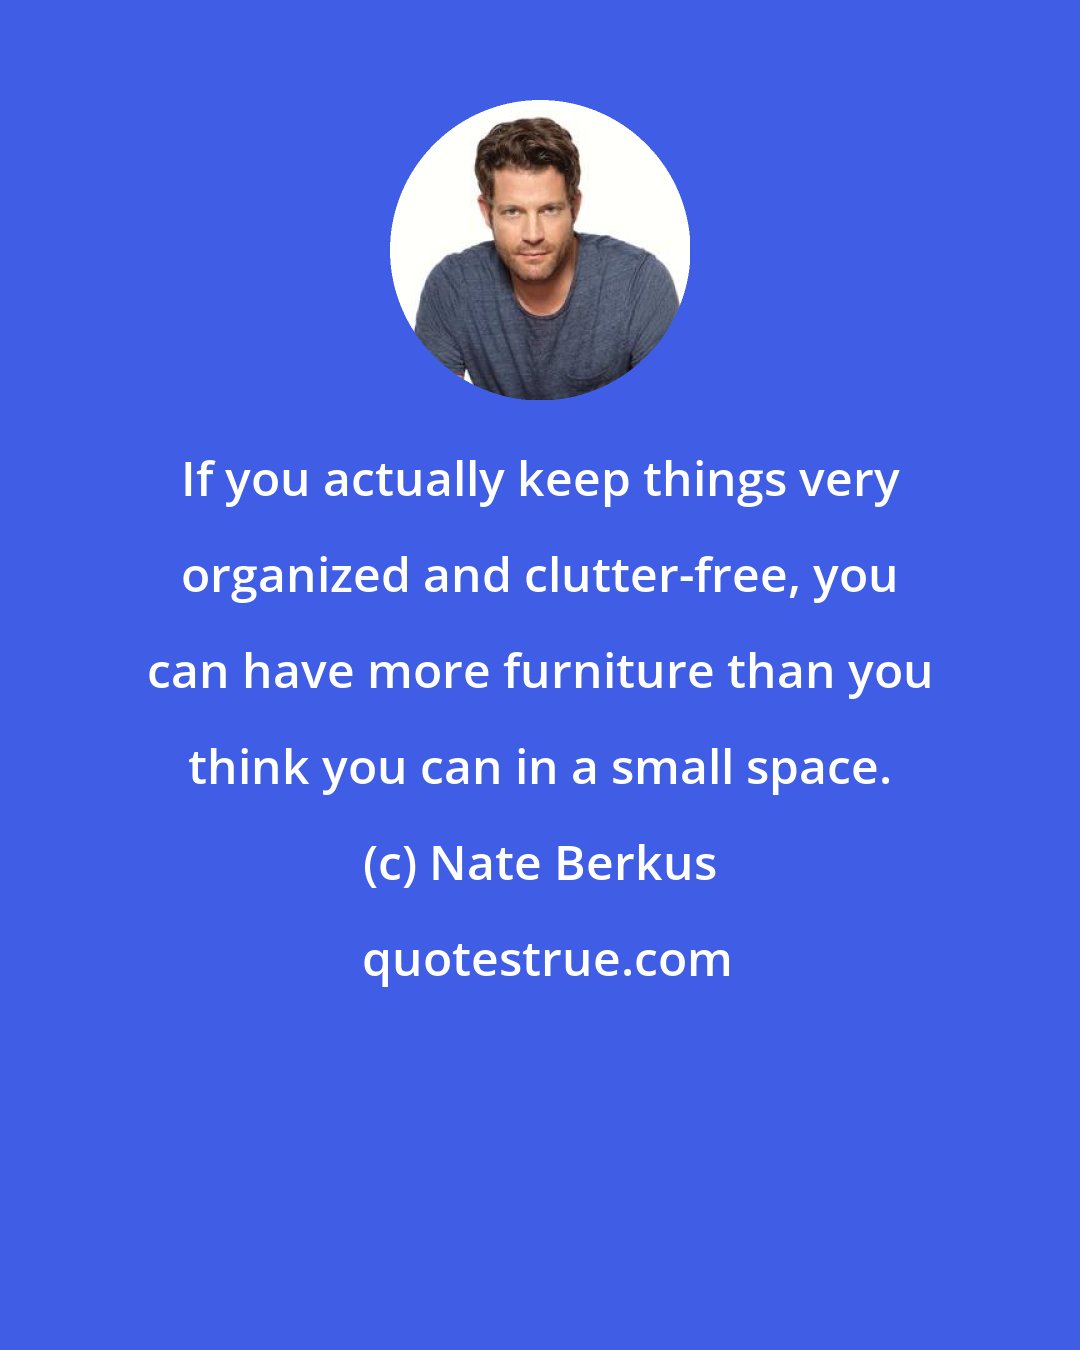 Nate Berkus: If you actually keep things very organized and clutter-free, you can have more furniture than you think you can in a small space.